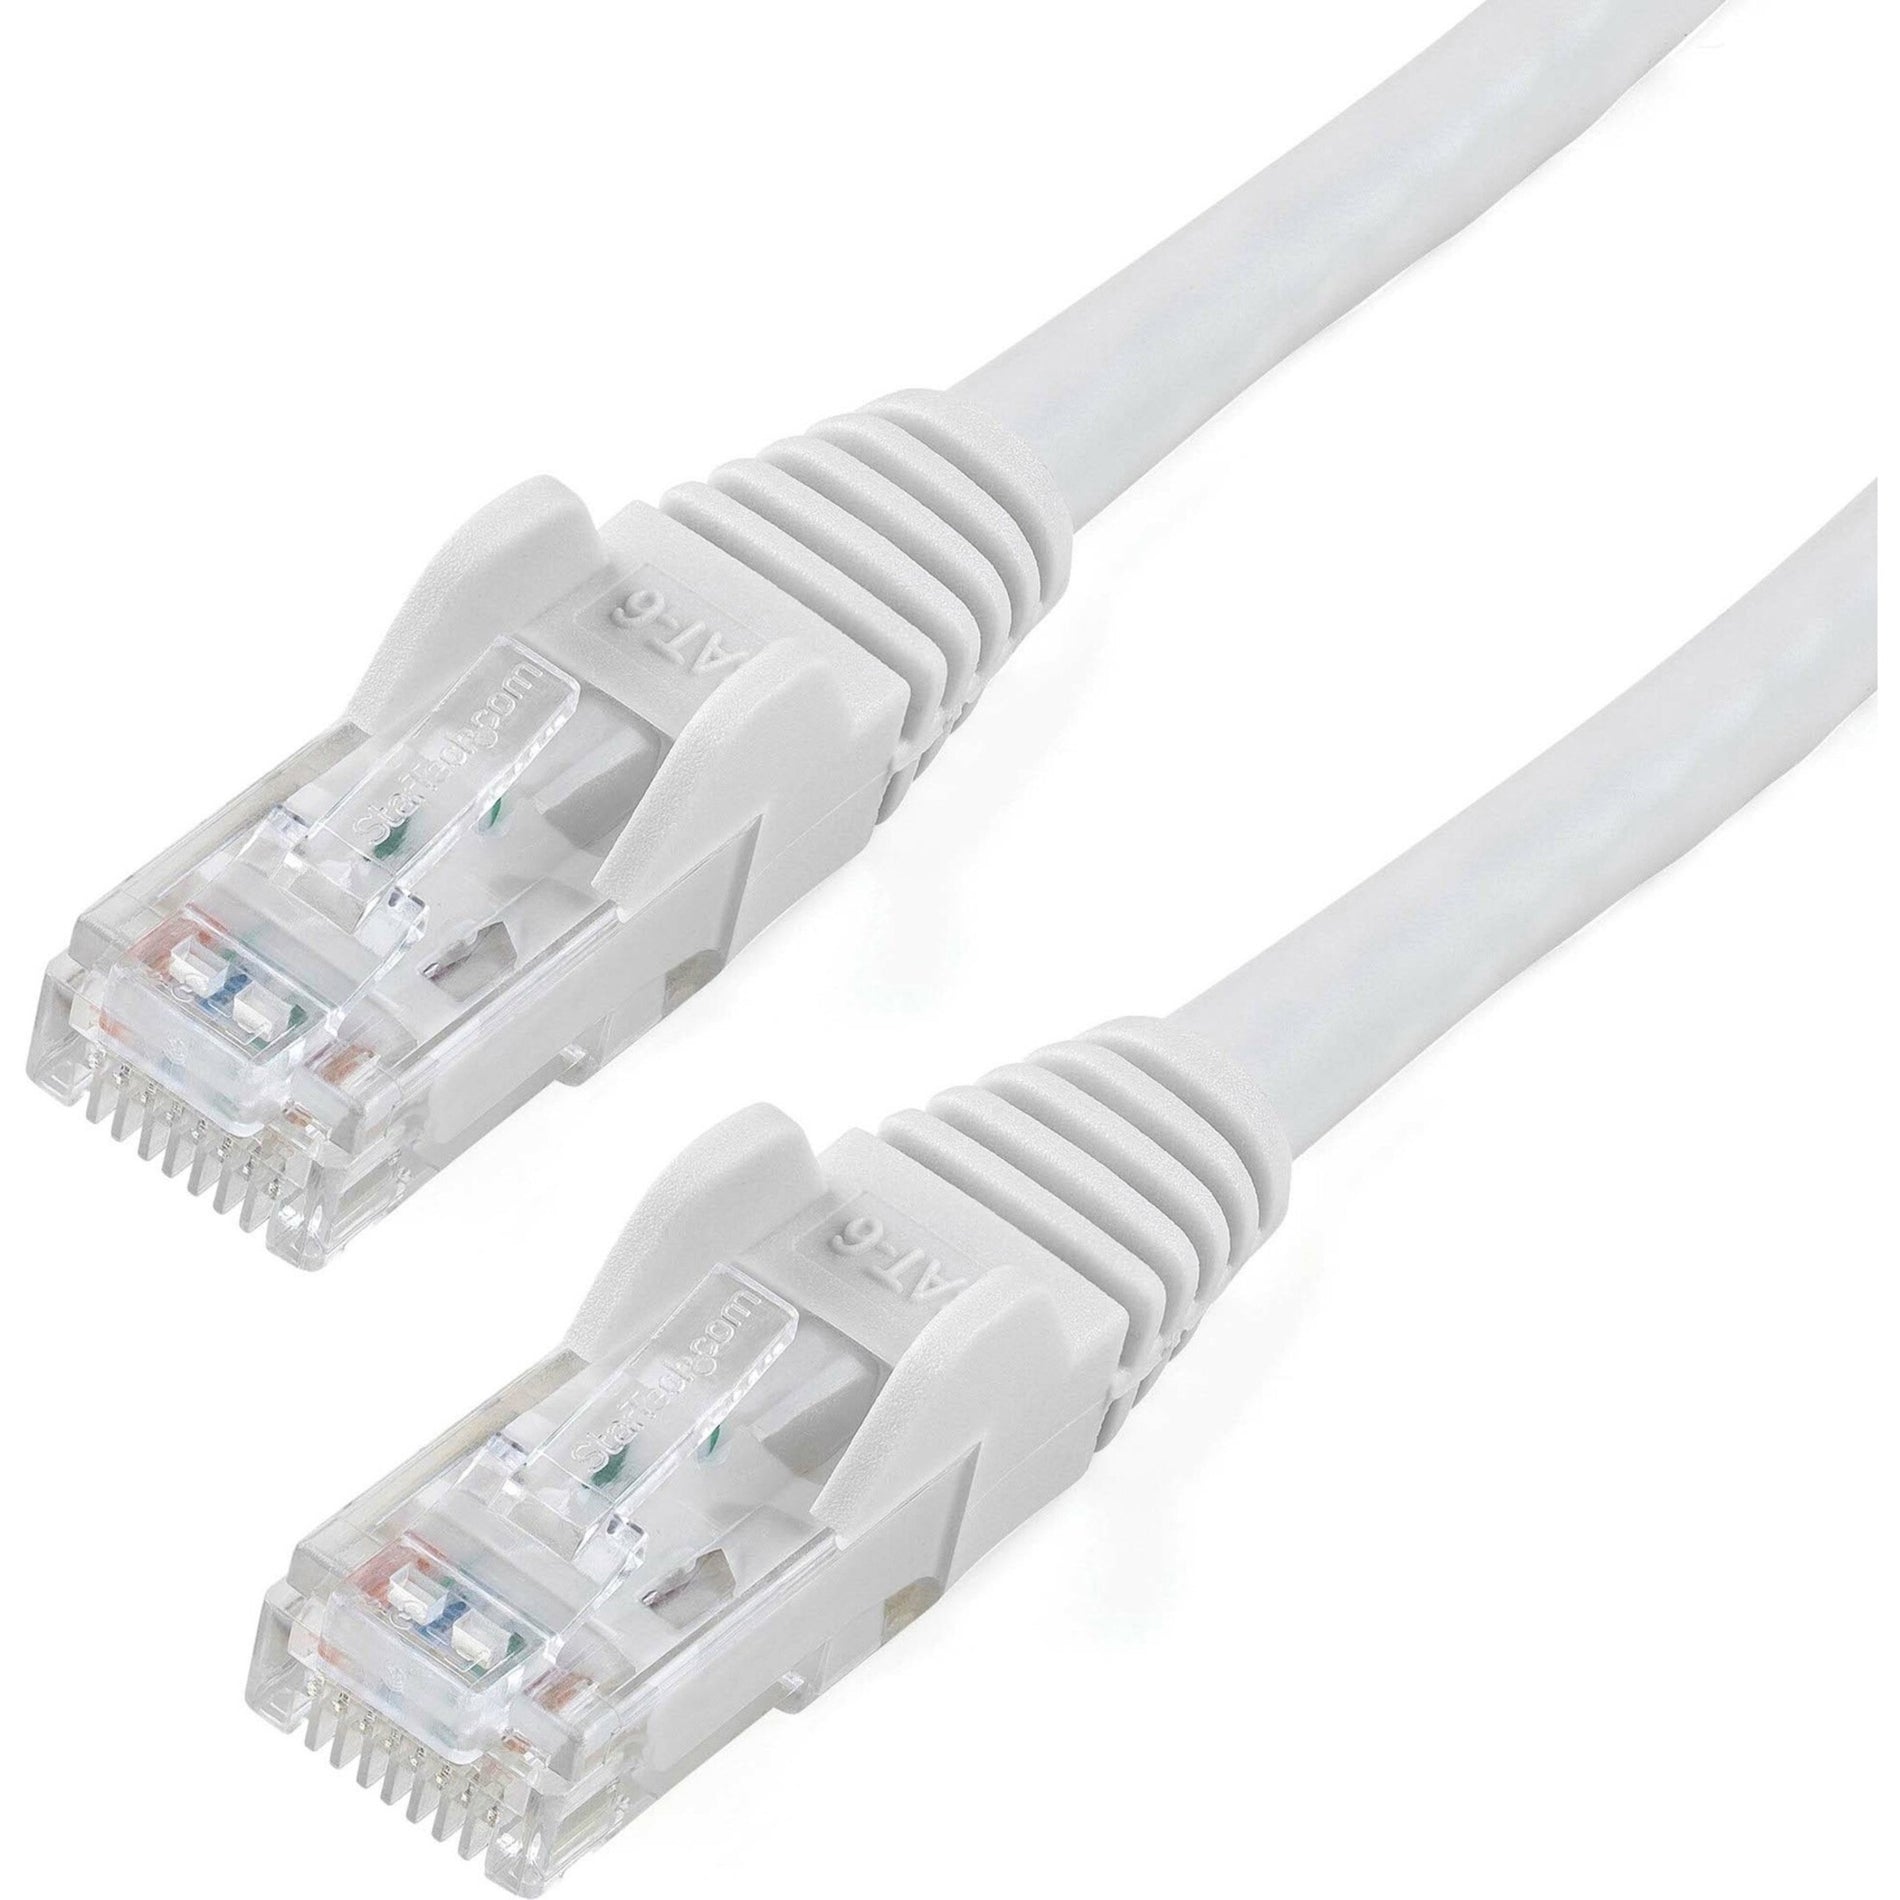 StarTech.com N6PATCH5WH Cat6 UTP Patch Network Cable, 5 ft White Ethernet Cable